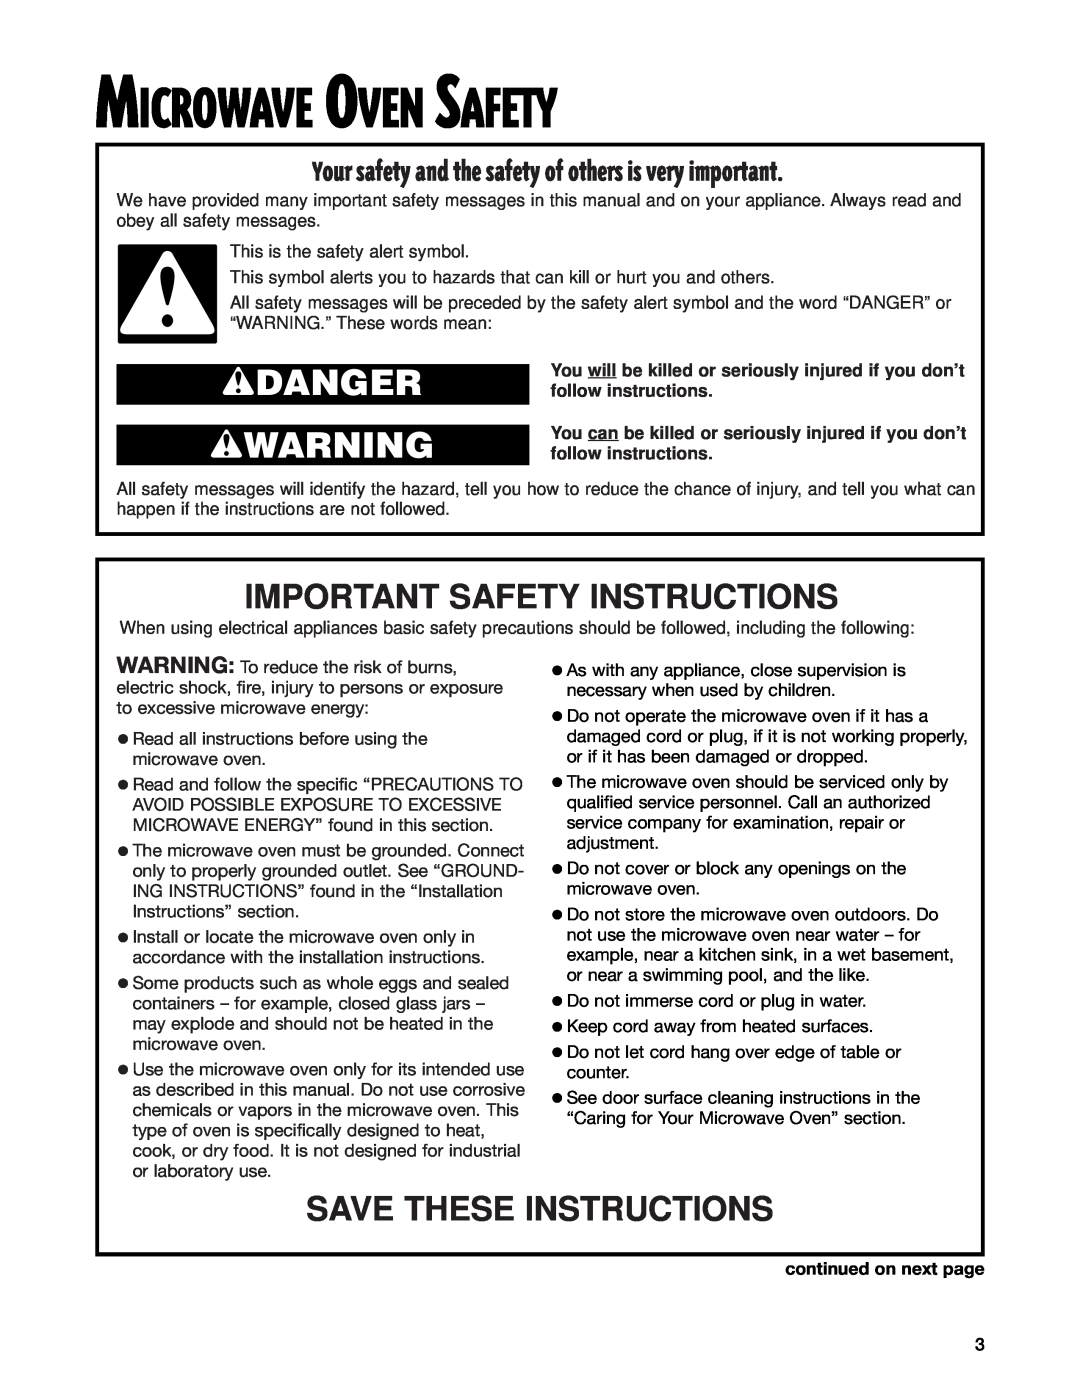 Whirlpool YMT3115SH Microwave Oven Safety, wDANGER wWARNING, Important Safety Instructions, Save These Instructions 